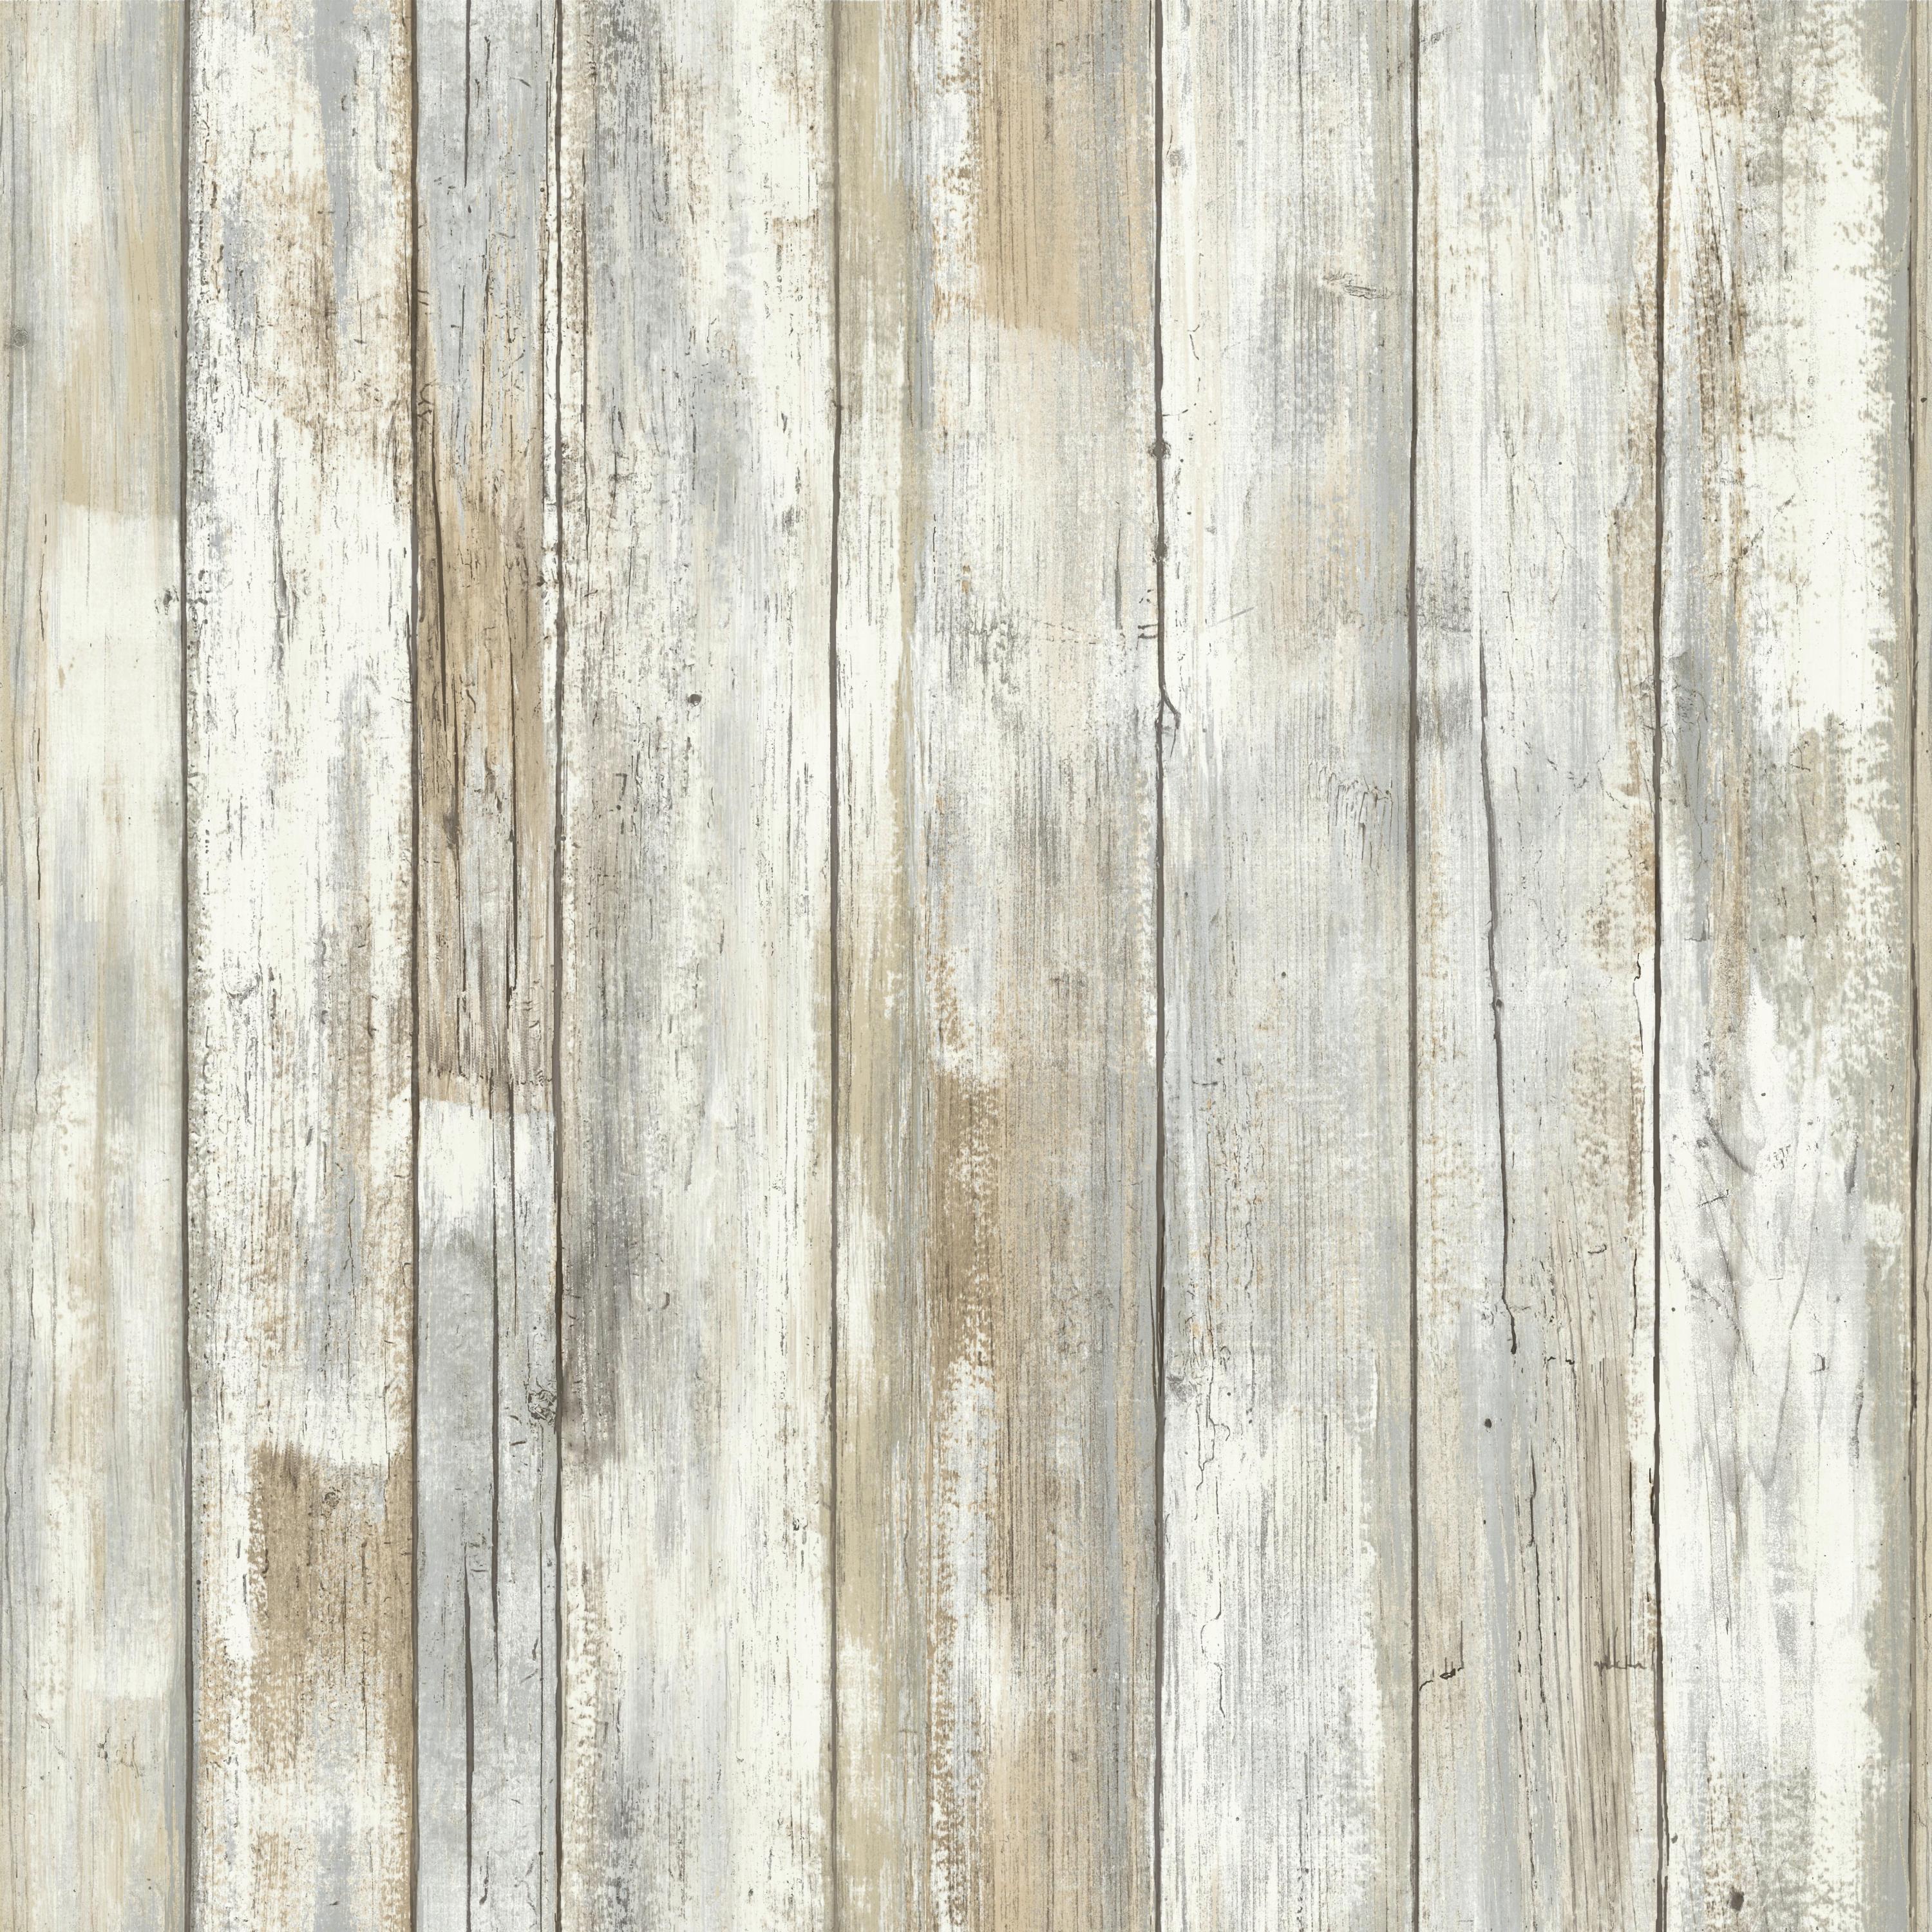 RoomMates Distressed Wood Peel and Stick Wall Decor Wallpapers.